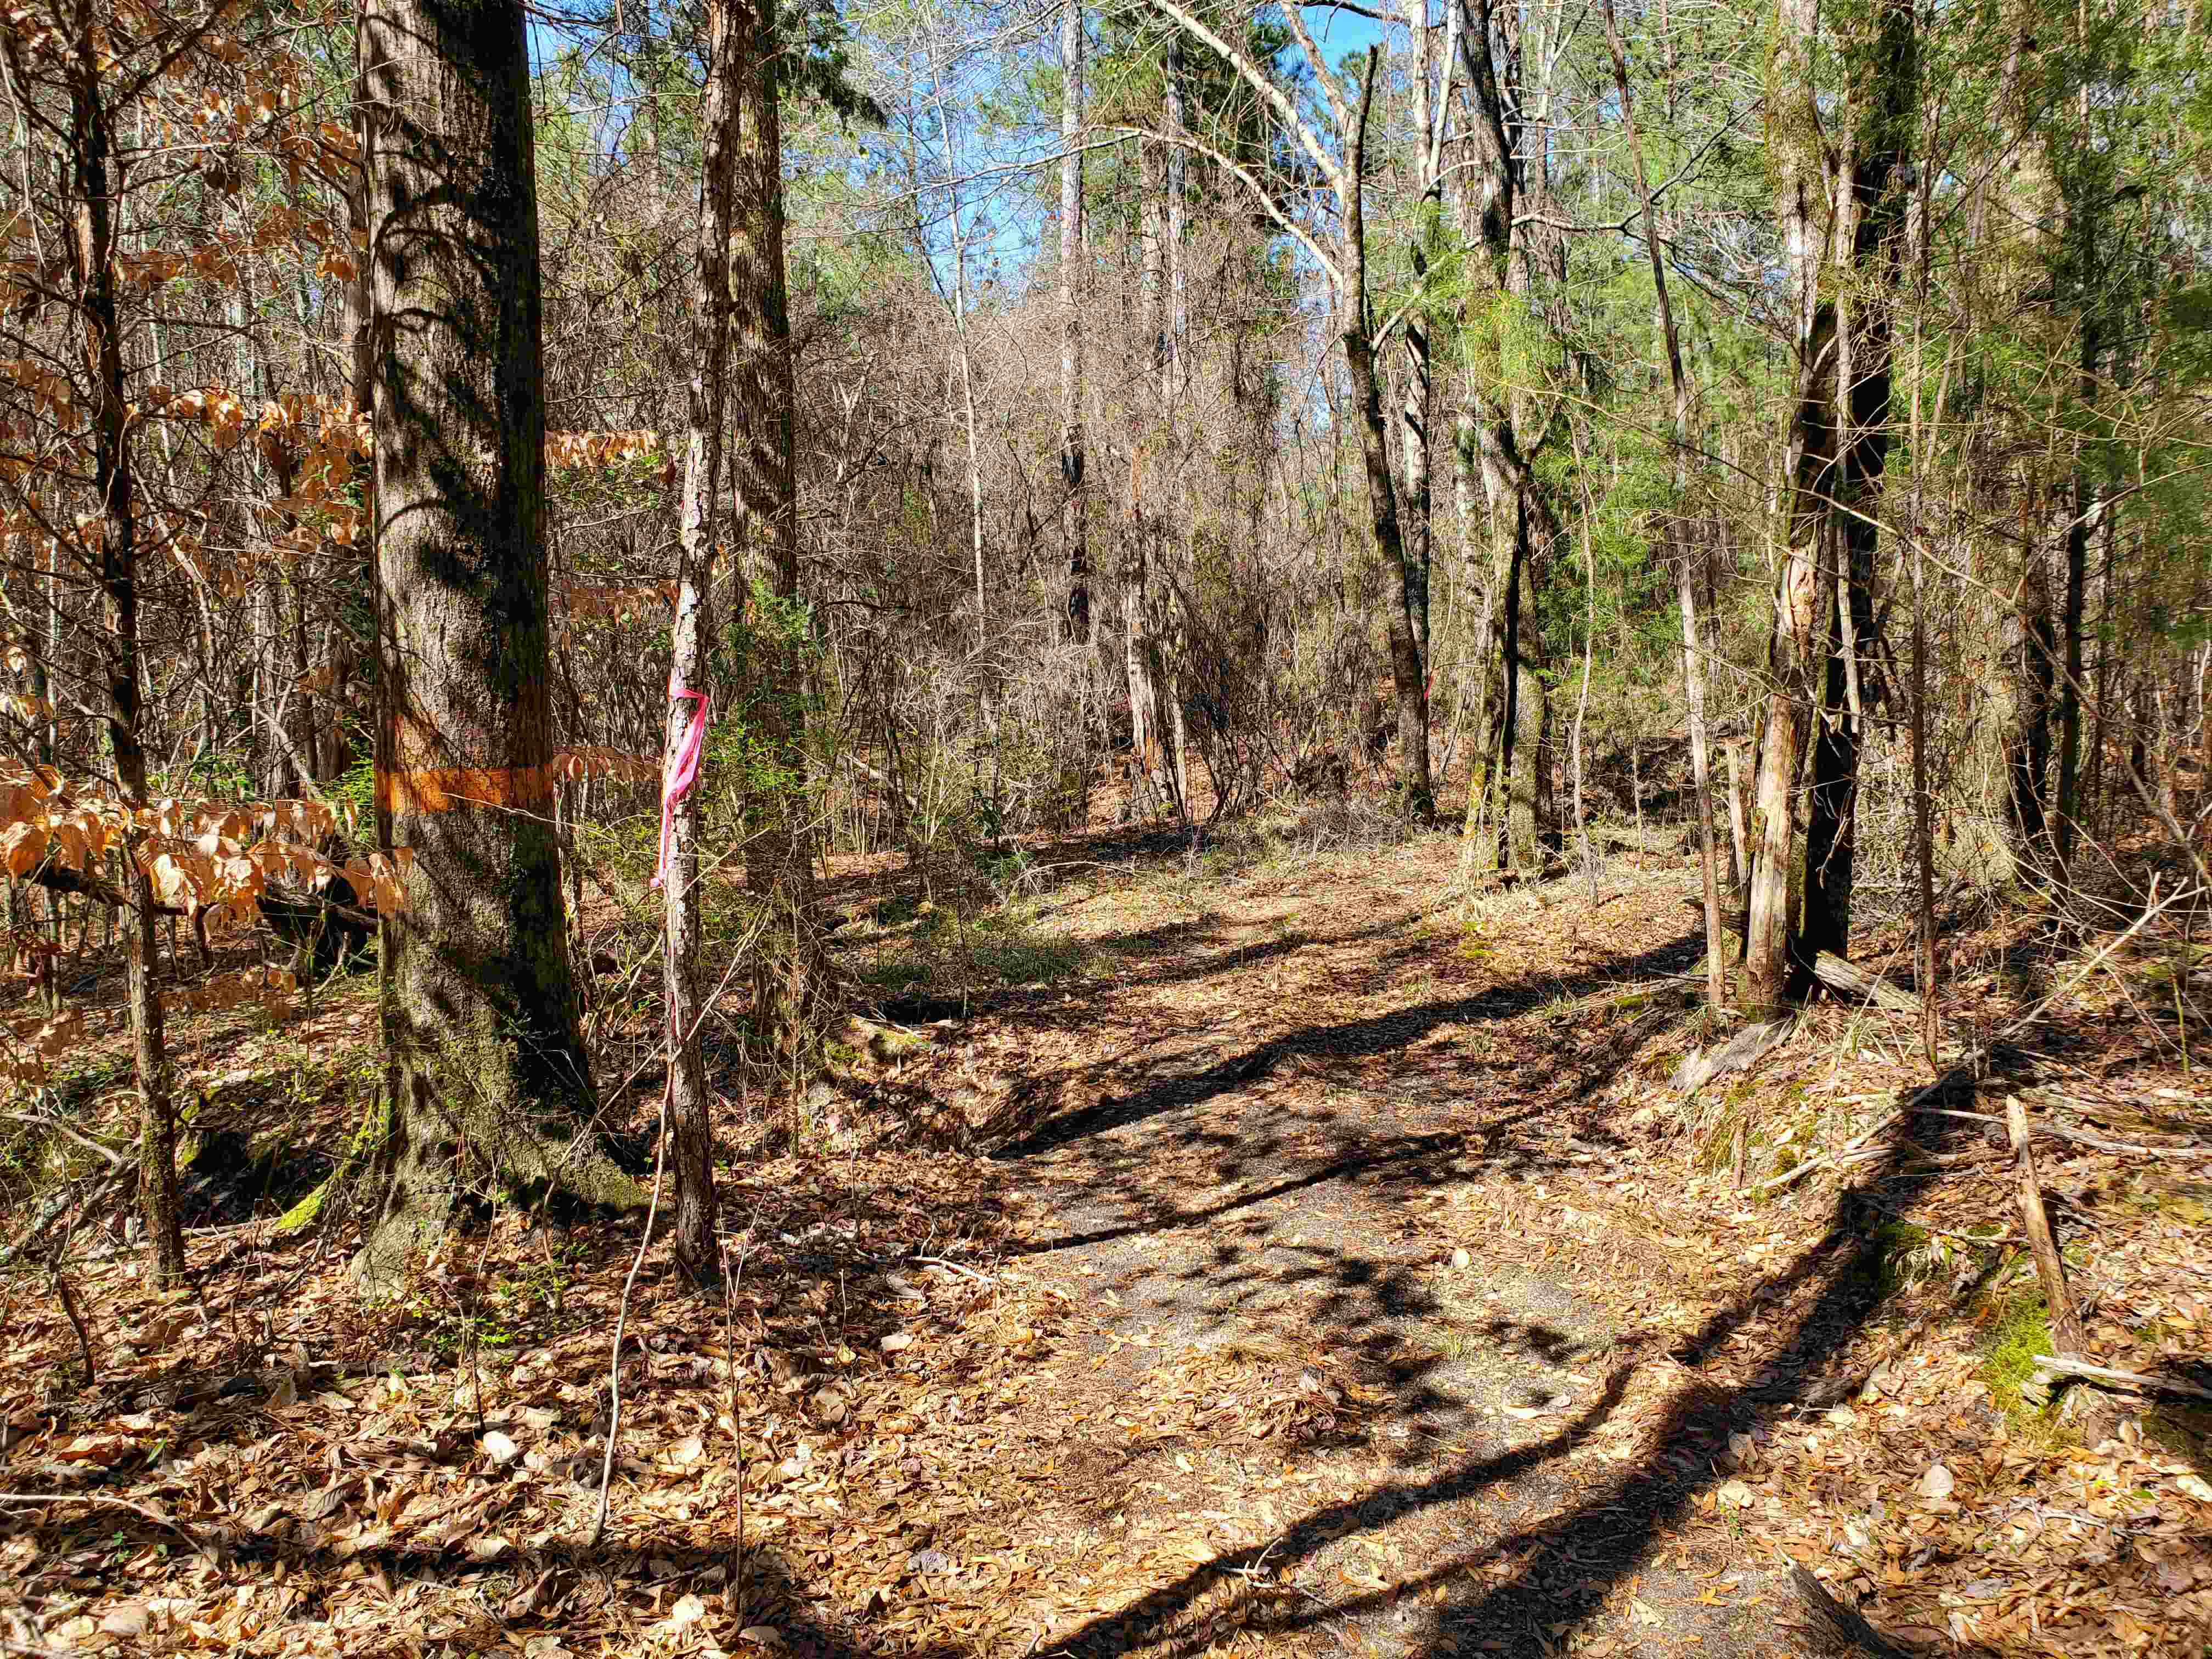 A trail along the boundary line showing orange paint